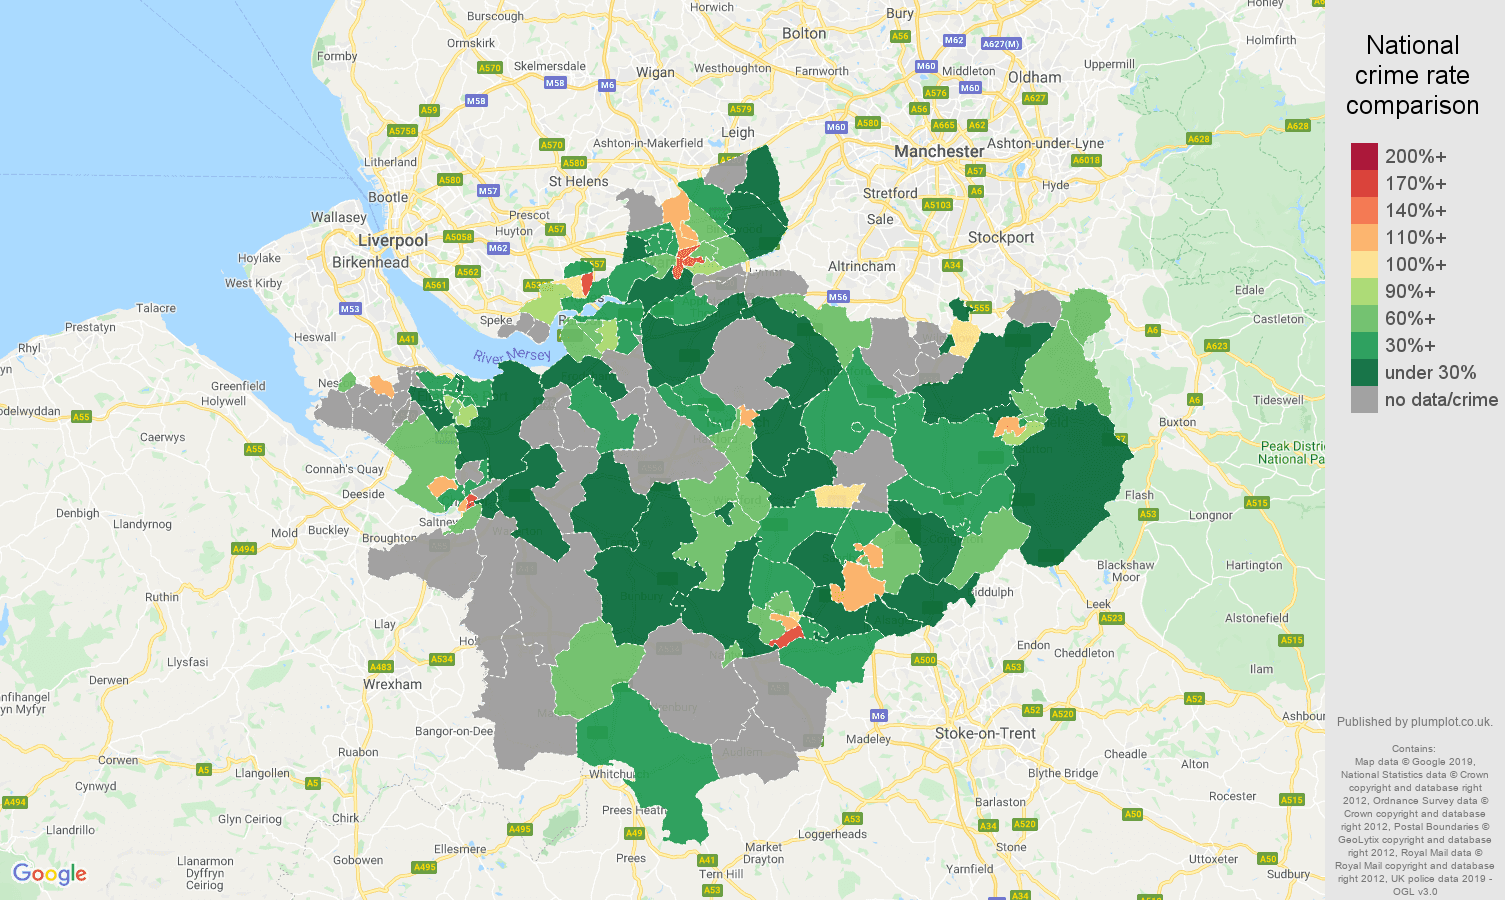 Cheshire possession of weapons crime rate comparison map